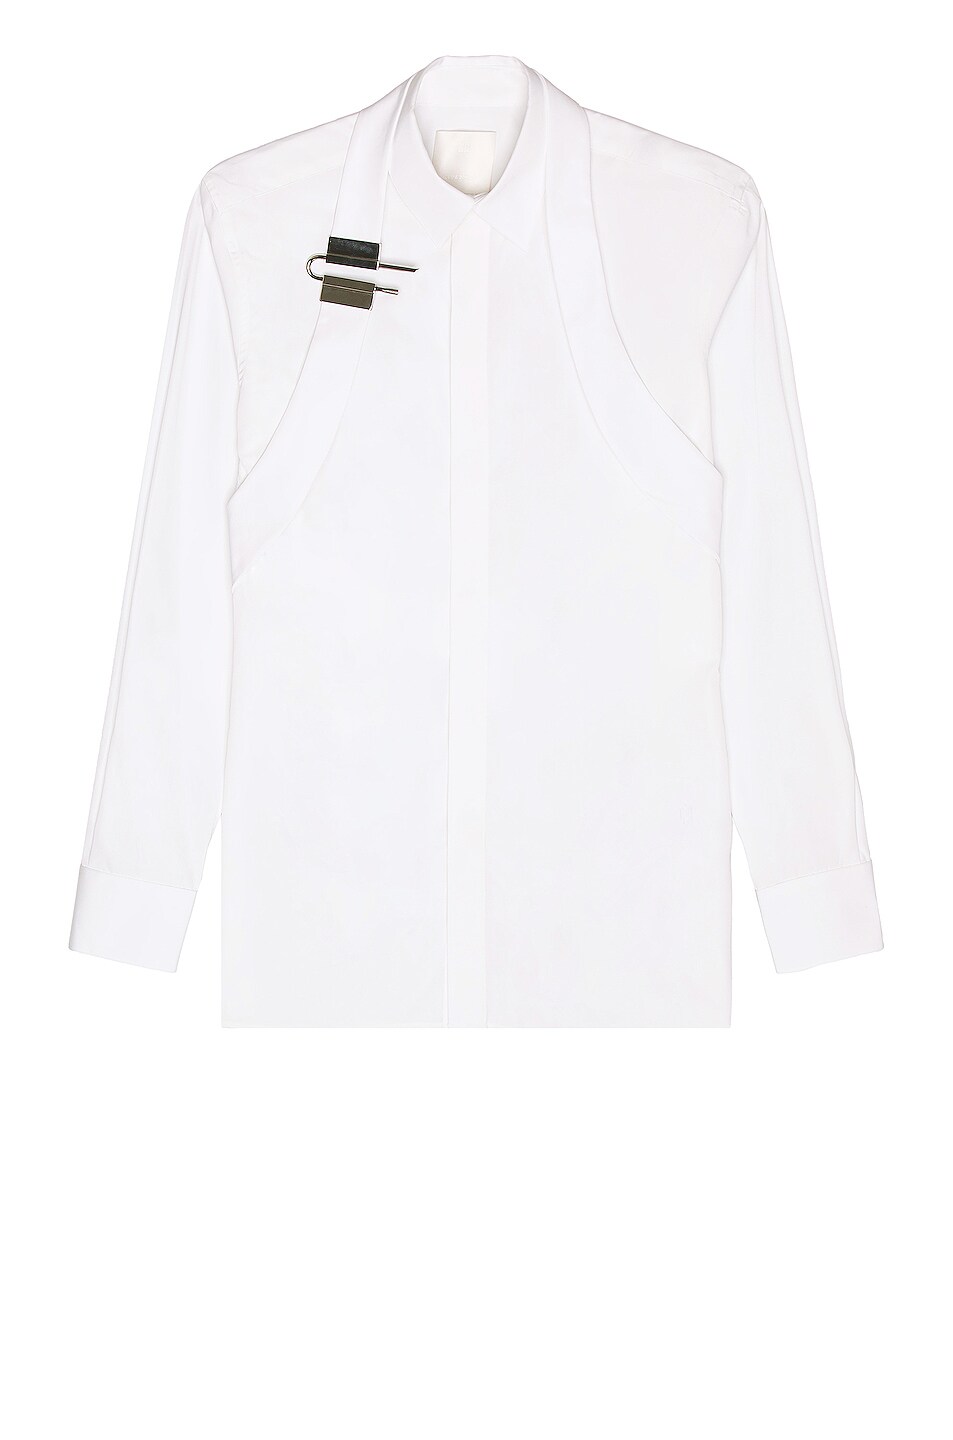 Image 1 of Givenchy Contemporary Fit Shirt With U Lock Harness in White